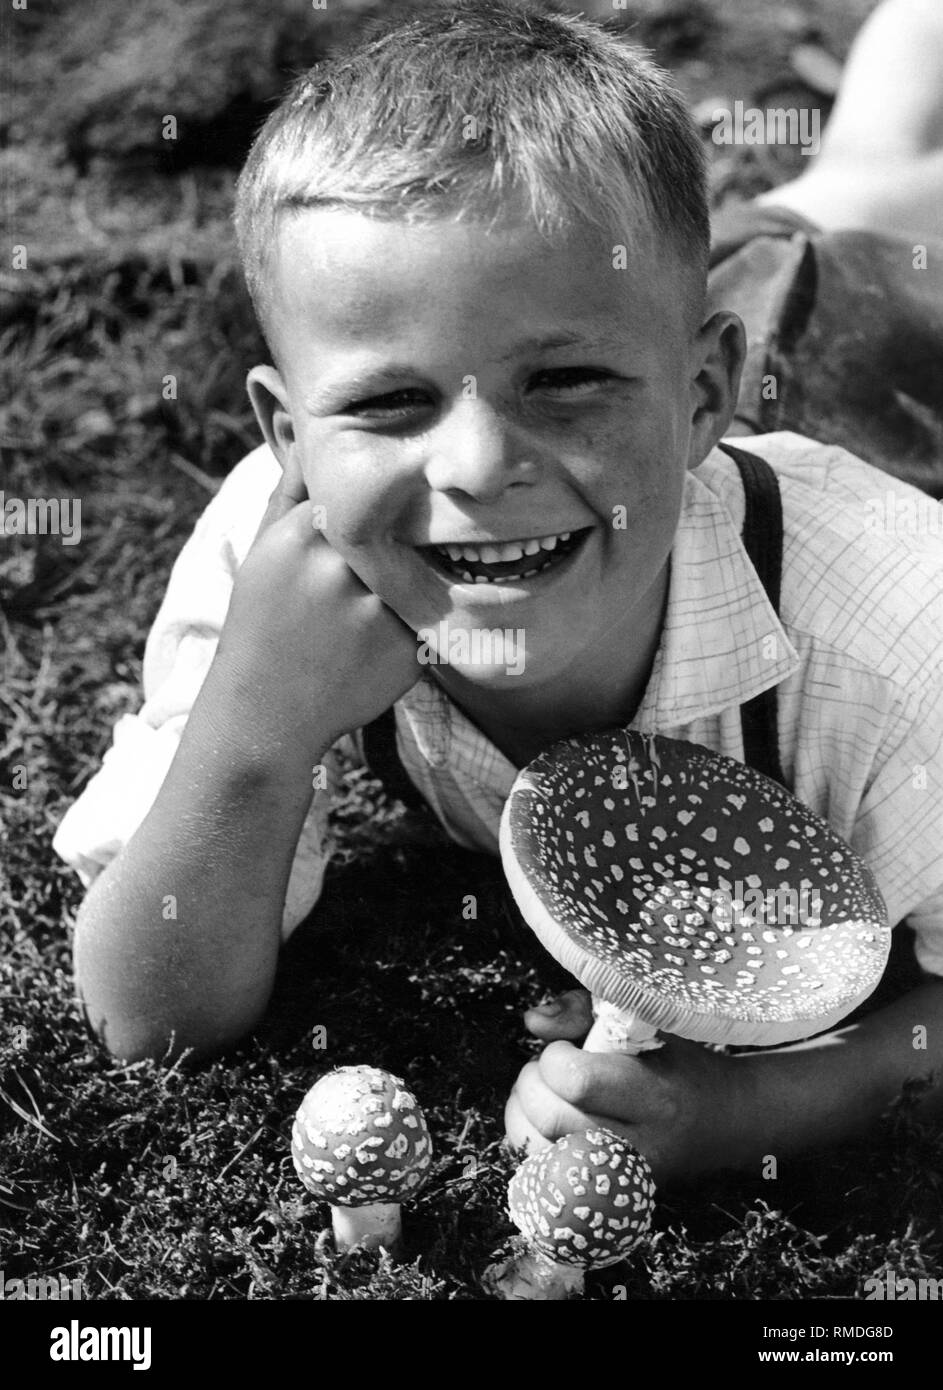 Junge mit Fly agaric, 50 s Stockfoto